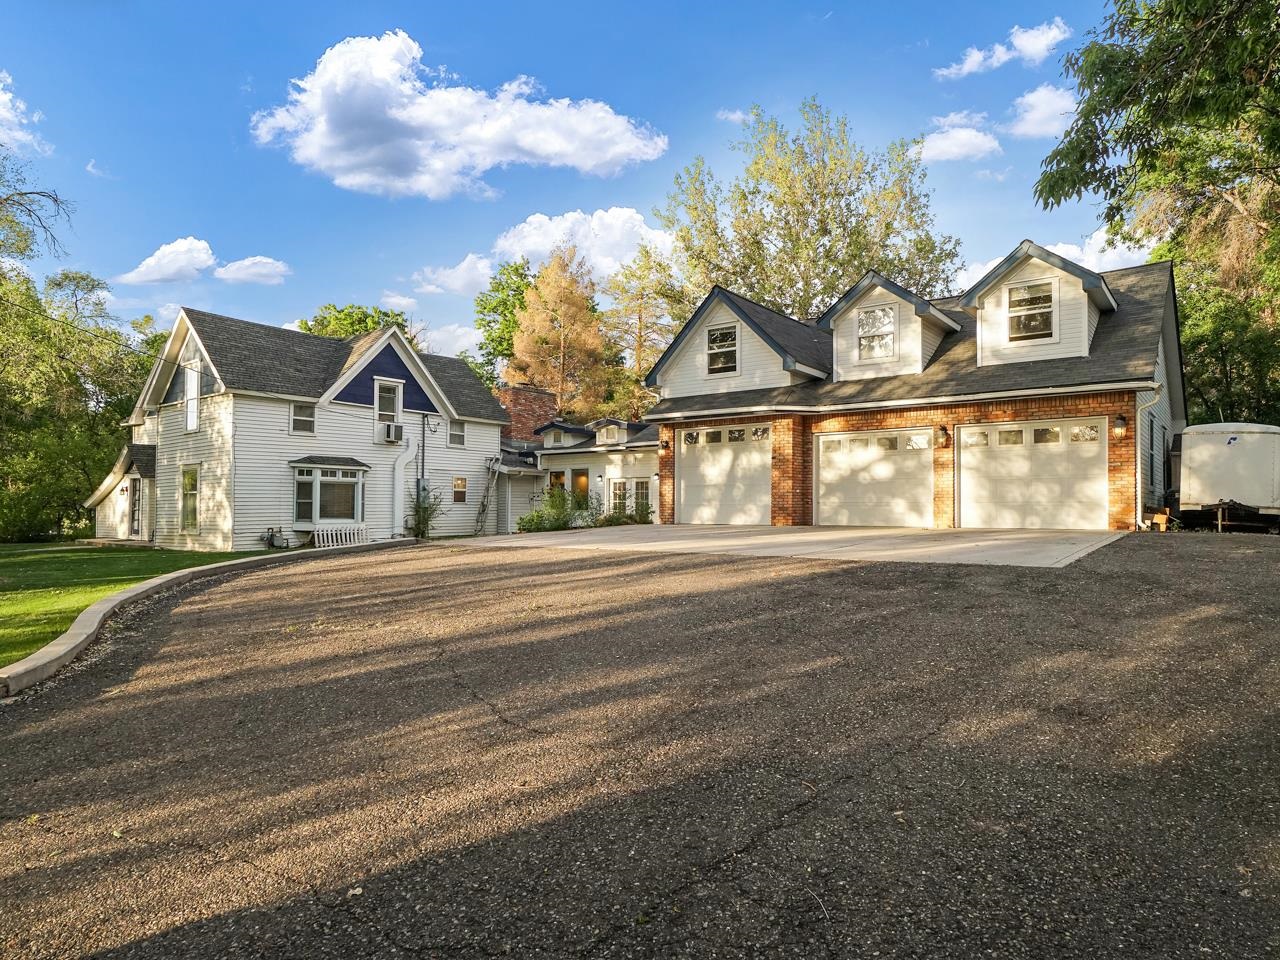 662 26 Road, Grand Junction, CO